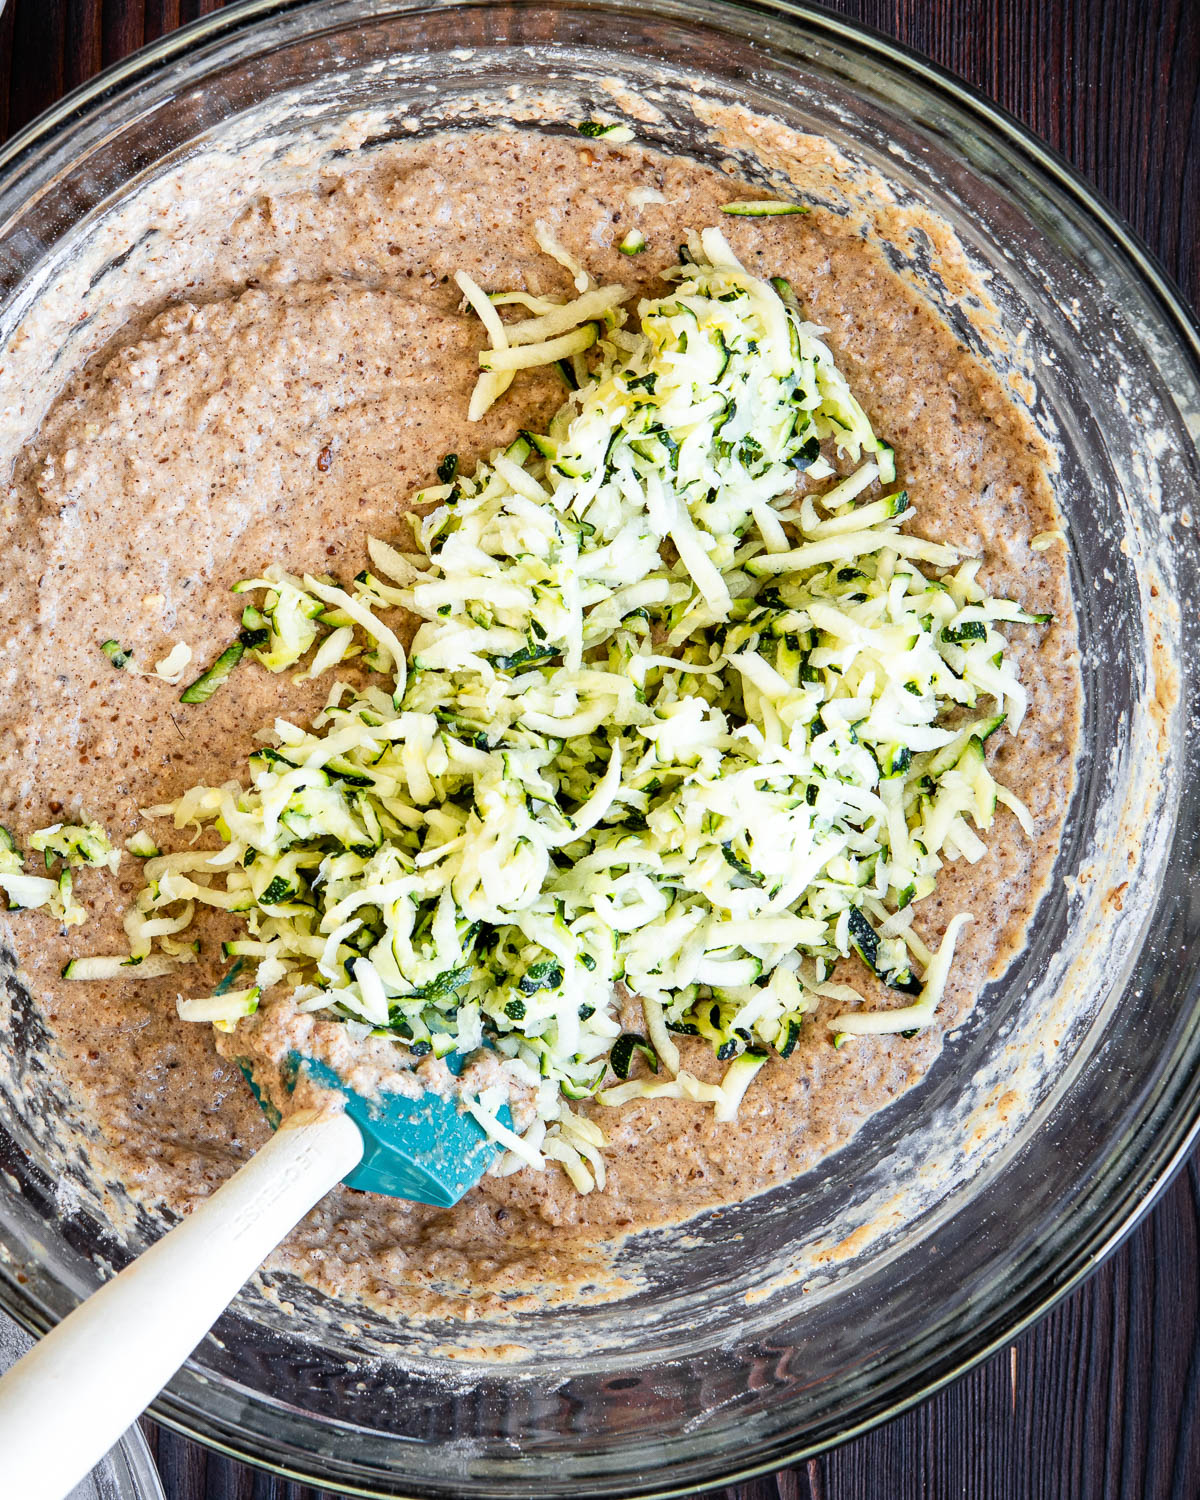 stirring shredded zucchini into a glass bowl of other ingredients.